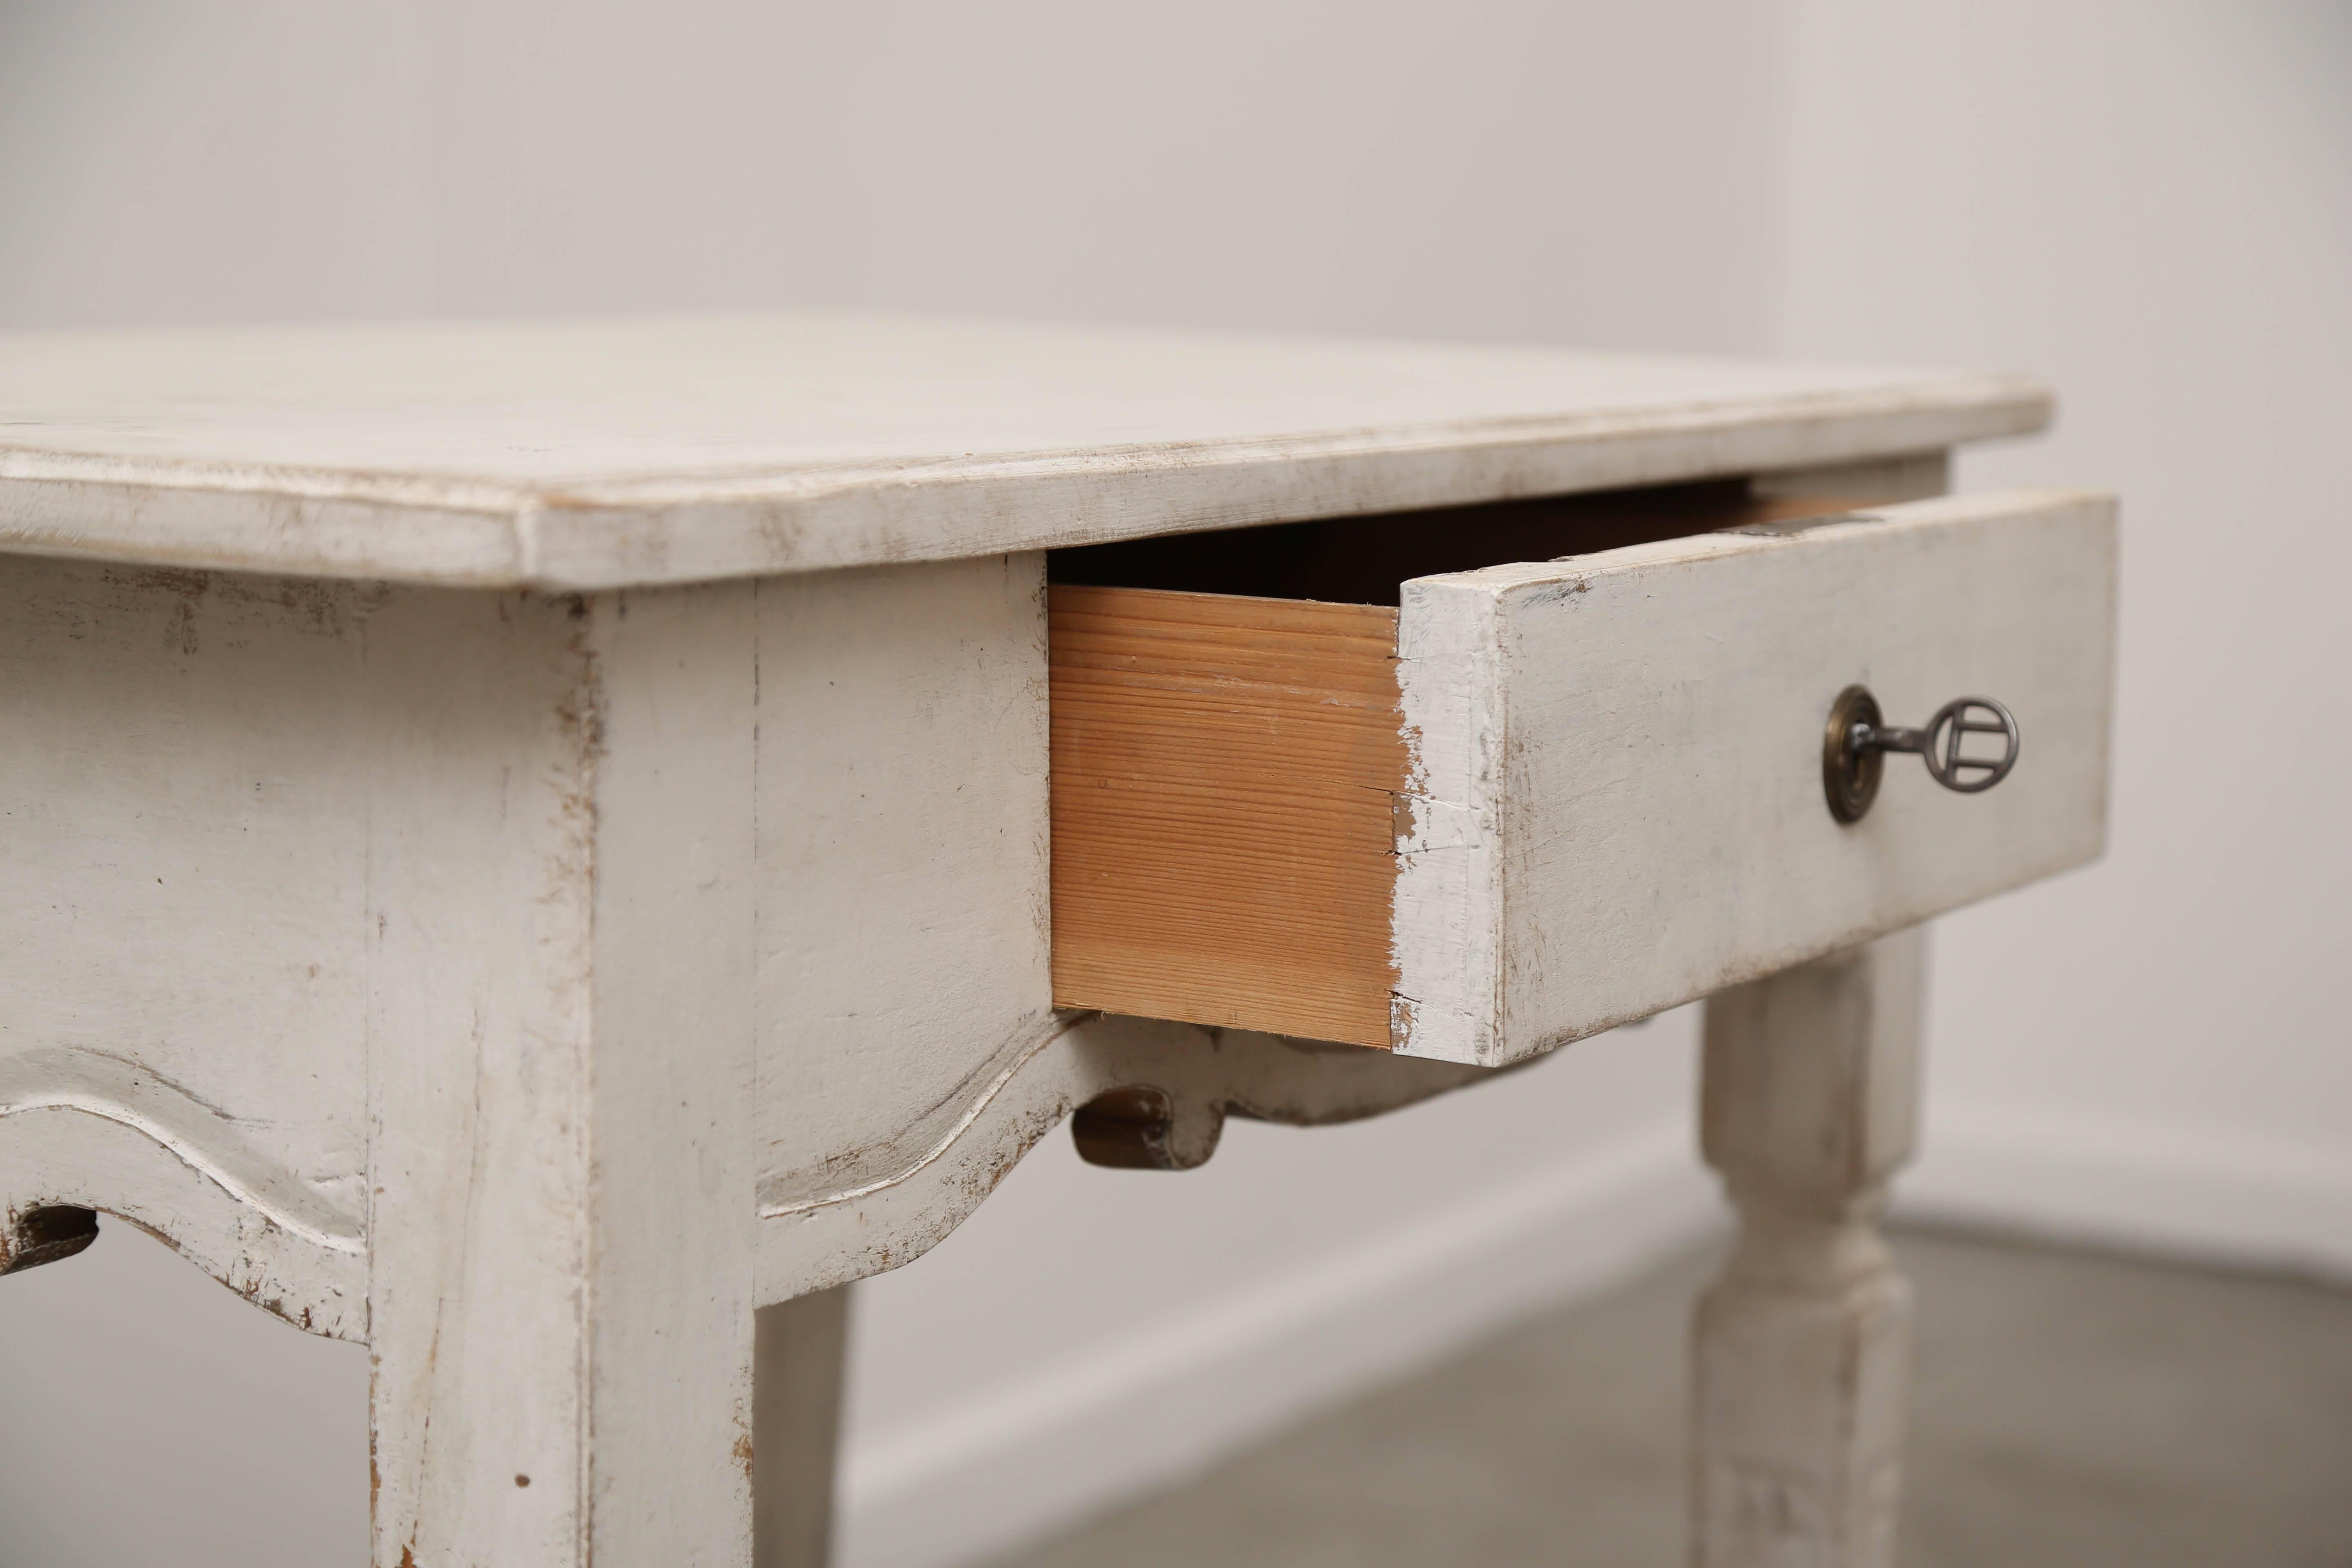 Antique Gustavian style painted side table with single drawer, 19th century, distressed and refreshed Gustavian white/ ivory paint.  That sits on tapered fluted legs with triangular carving at top and the curved apron has turned carved wood